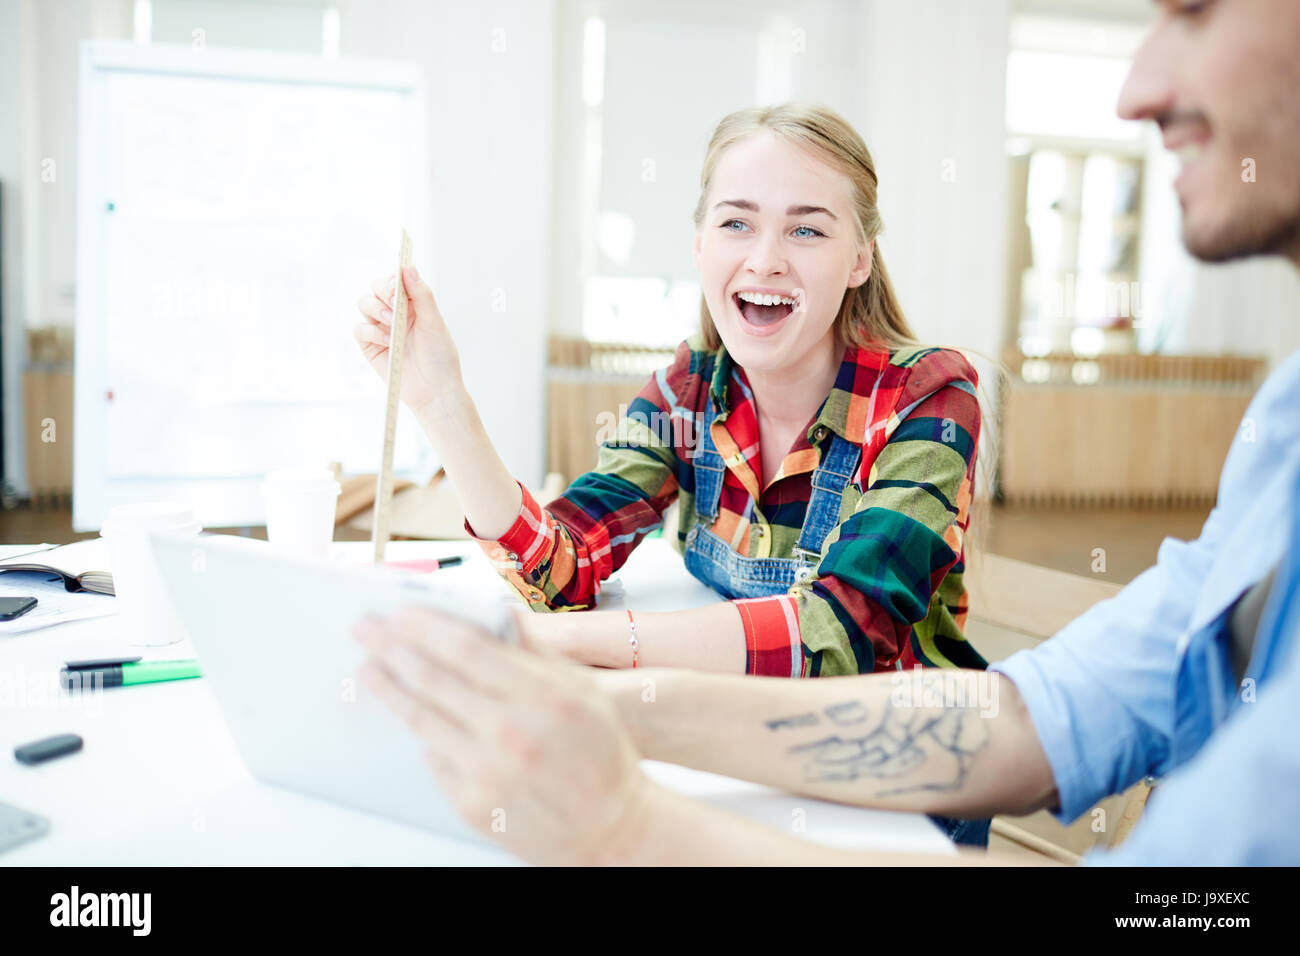 Pretty student laughing during discussion at lesson Stock Photo